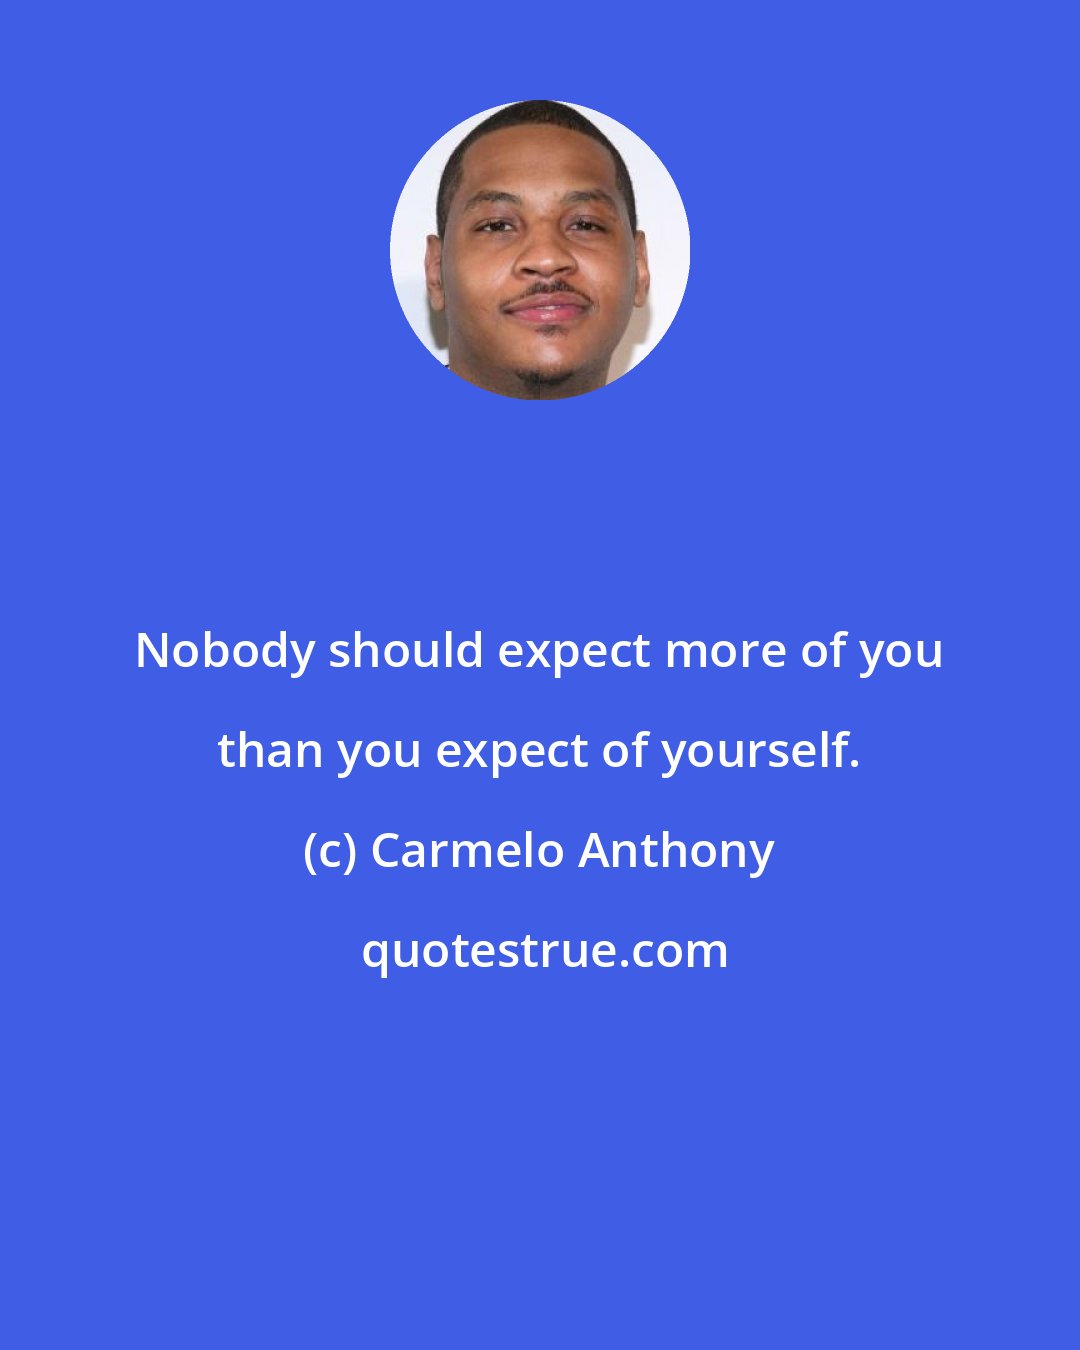 Carmelo Anthony: Nobody should expect more of you than you expect of yourself.